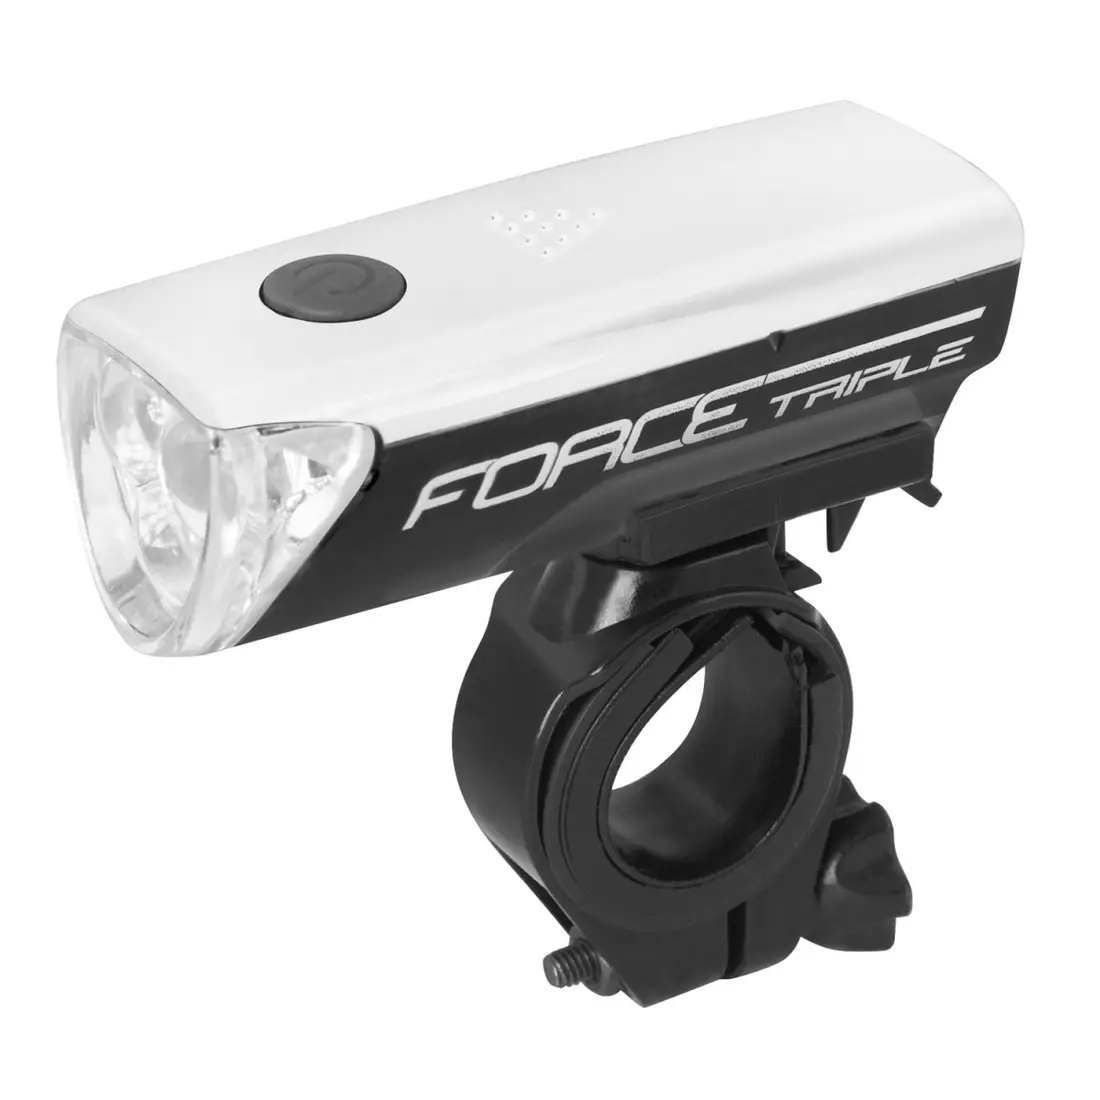 FORCE 45156 TRIPLE front bicycle light 3 x LED, 19 lumens